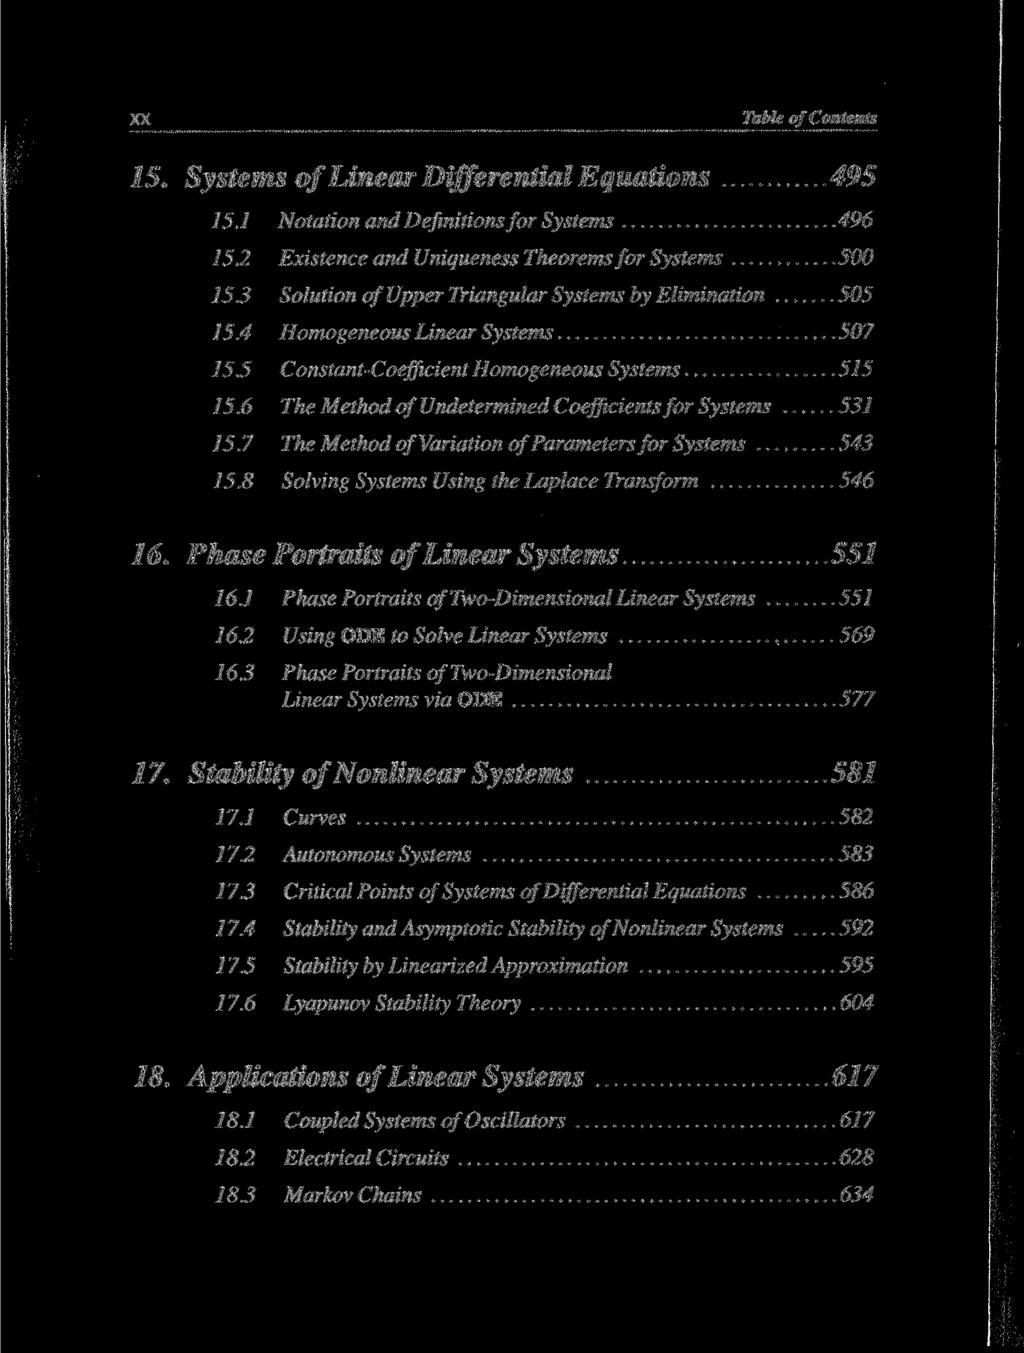 XX Table of Contents 15. Systems of Linear Differential Equations 495 15.1 Notation and Definitions for Systems 496 15.2 Existence and Uniqueness Theorems for Systems 500 15.